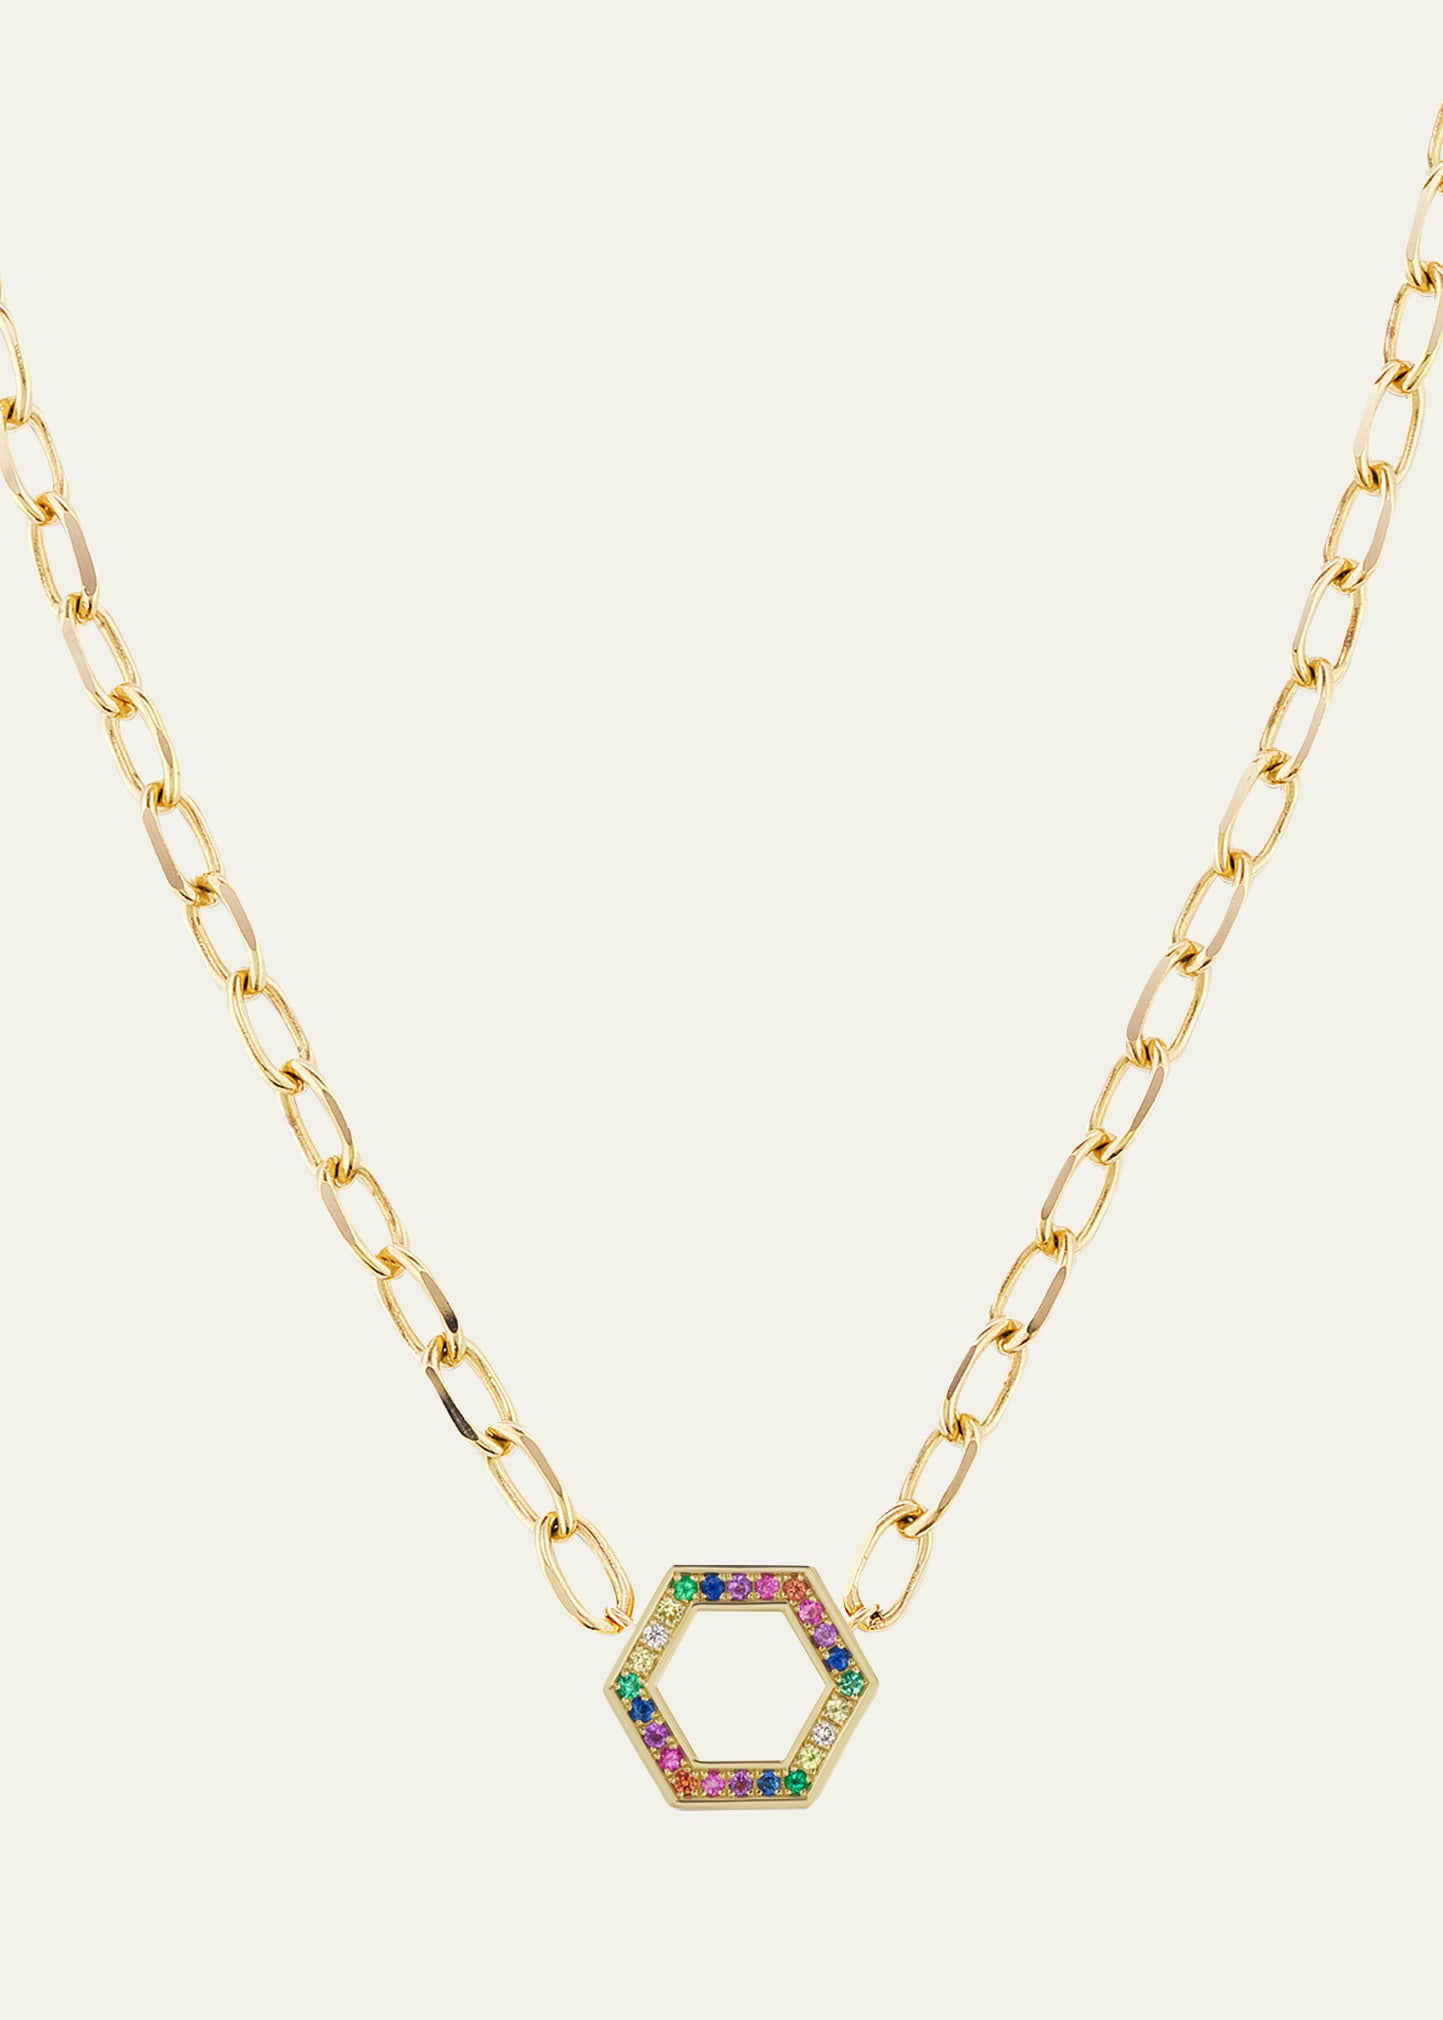 Rainbow Hex Cable Chain Foundation Necklace, 18"L